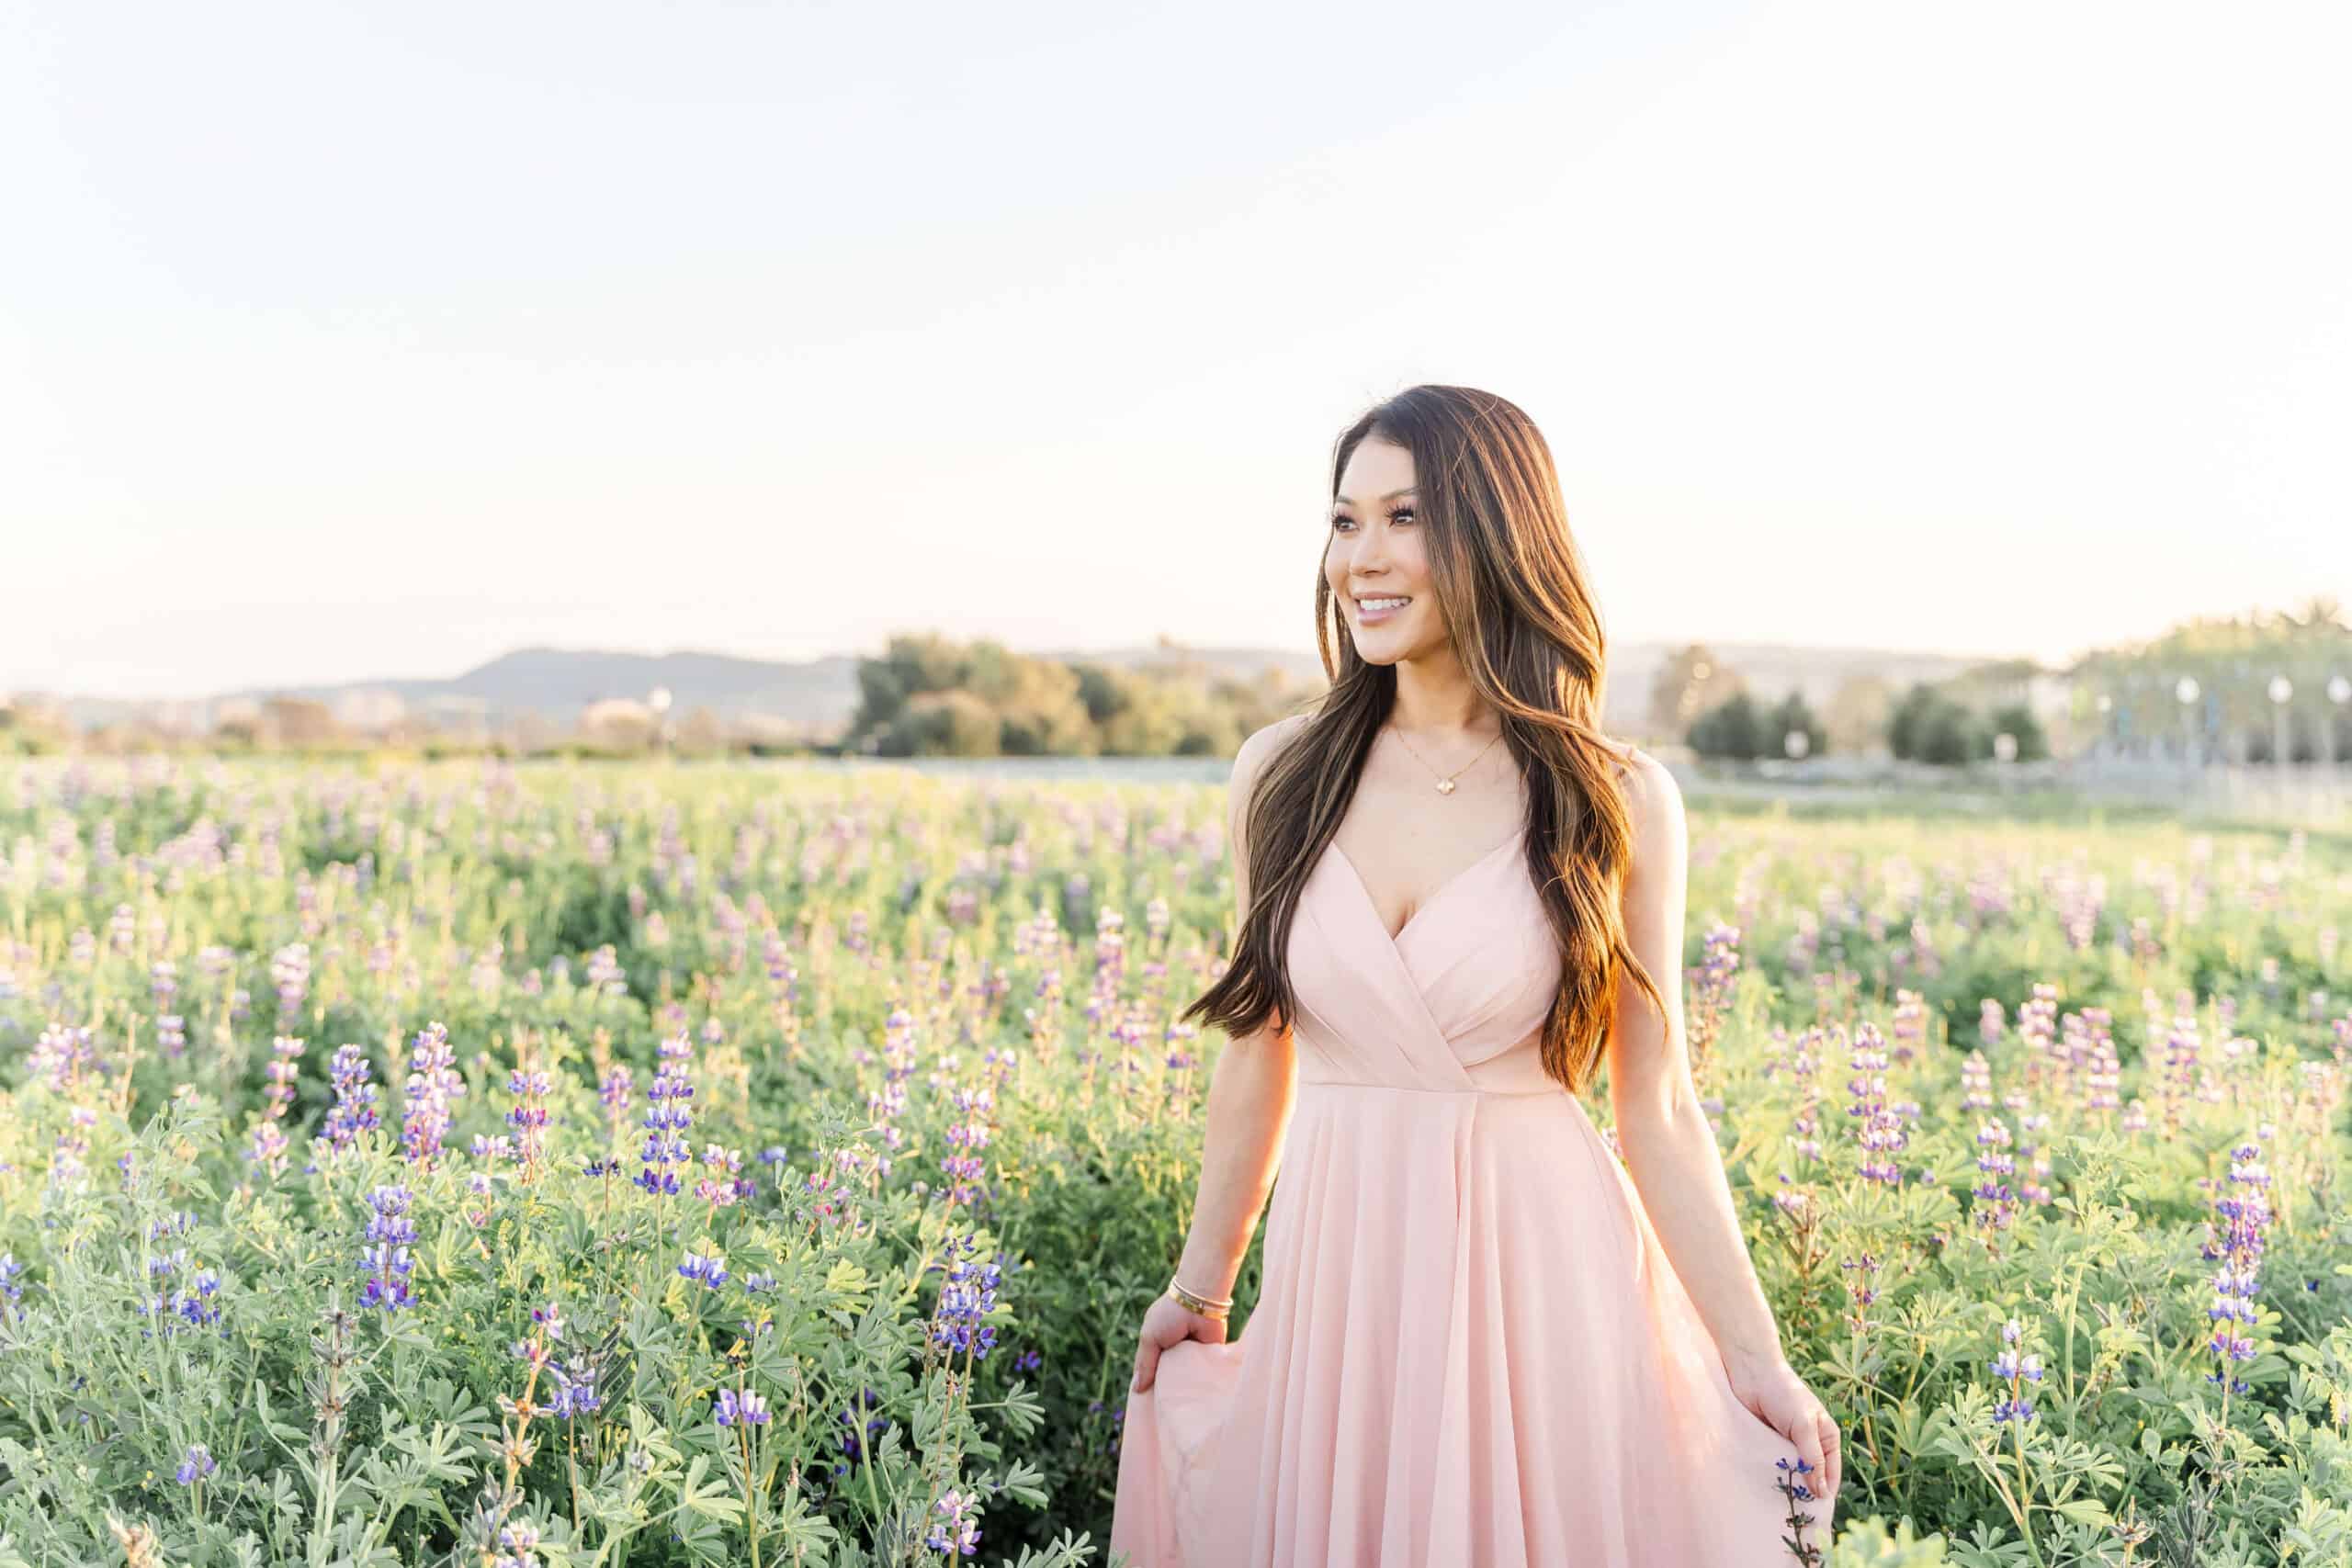 Asian woman in pink dress standing in a field of flowers